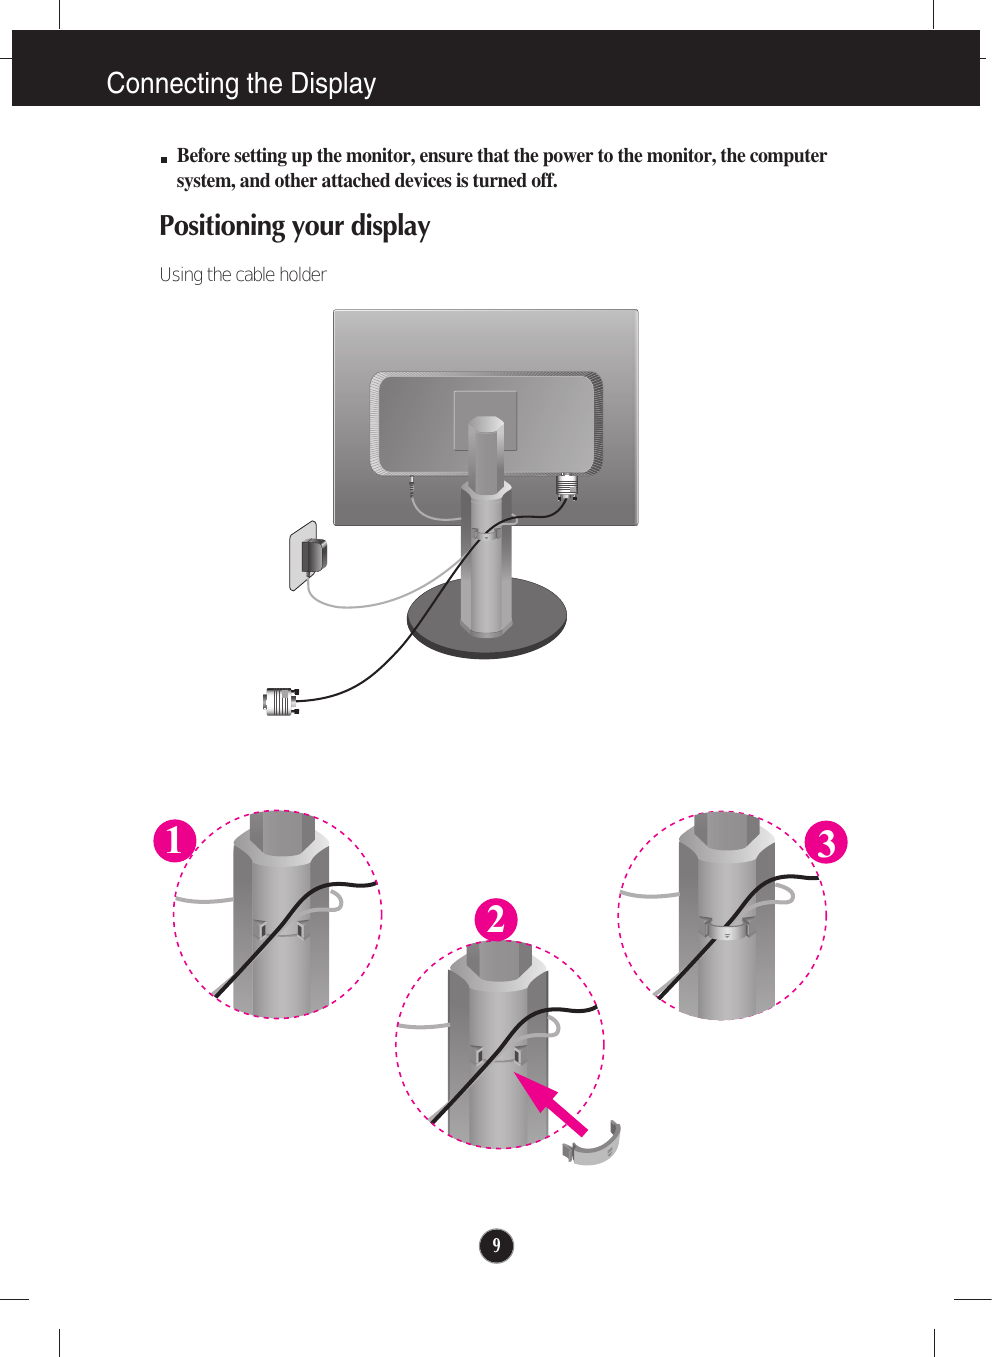 9Connecting the DisplayBefore setting up the monitor, ensure that the power to the monitor, the computersystem, and other attached devices is turned off.Positioning your display Using the cable holder123